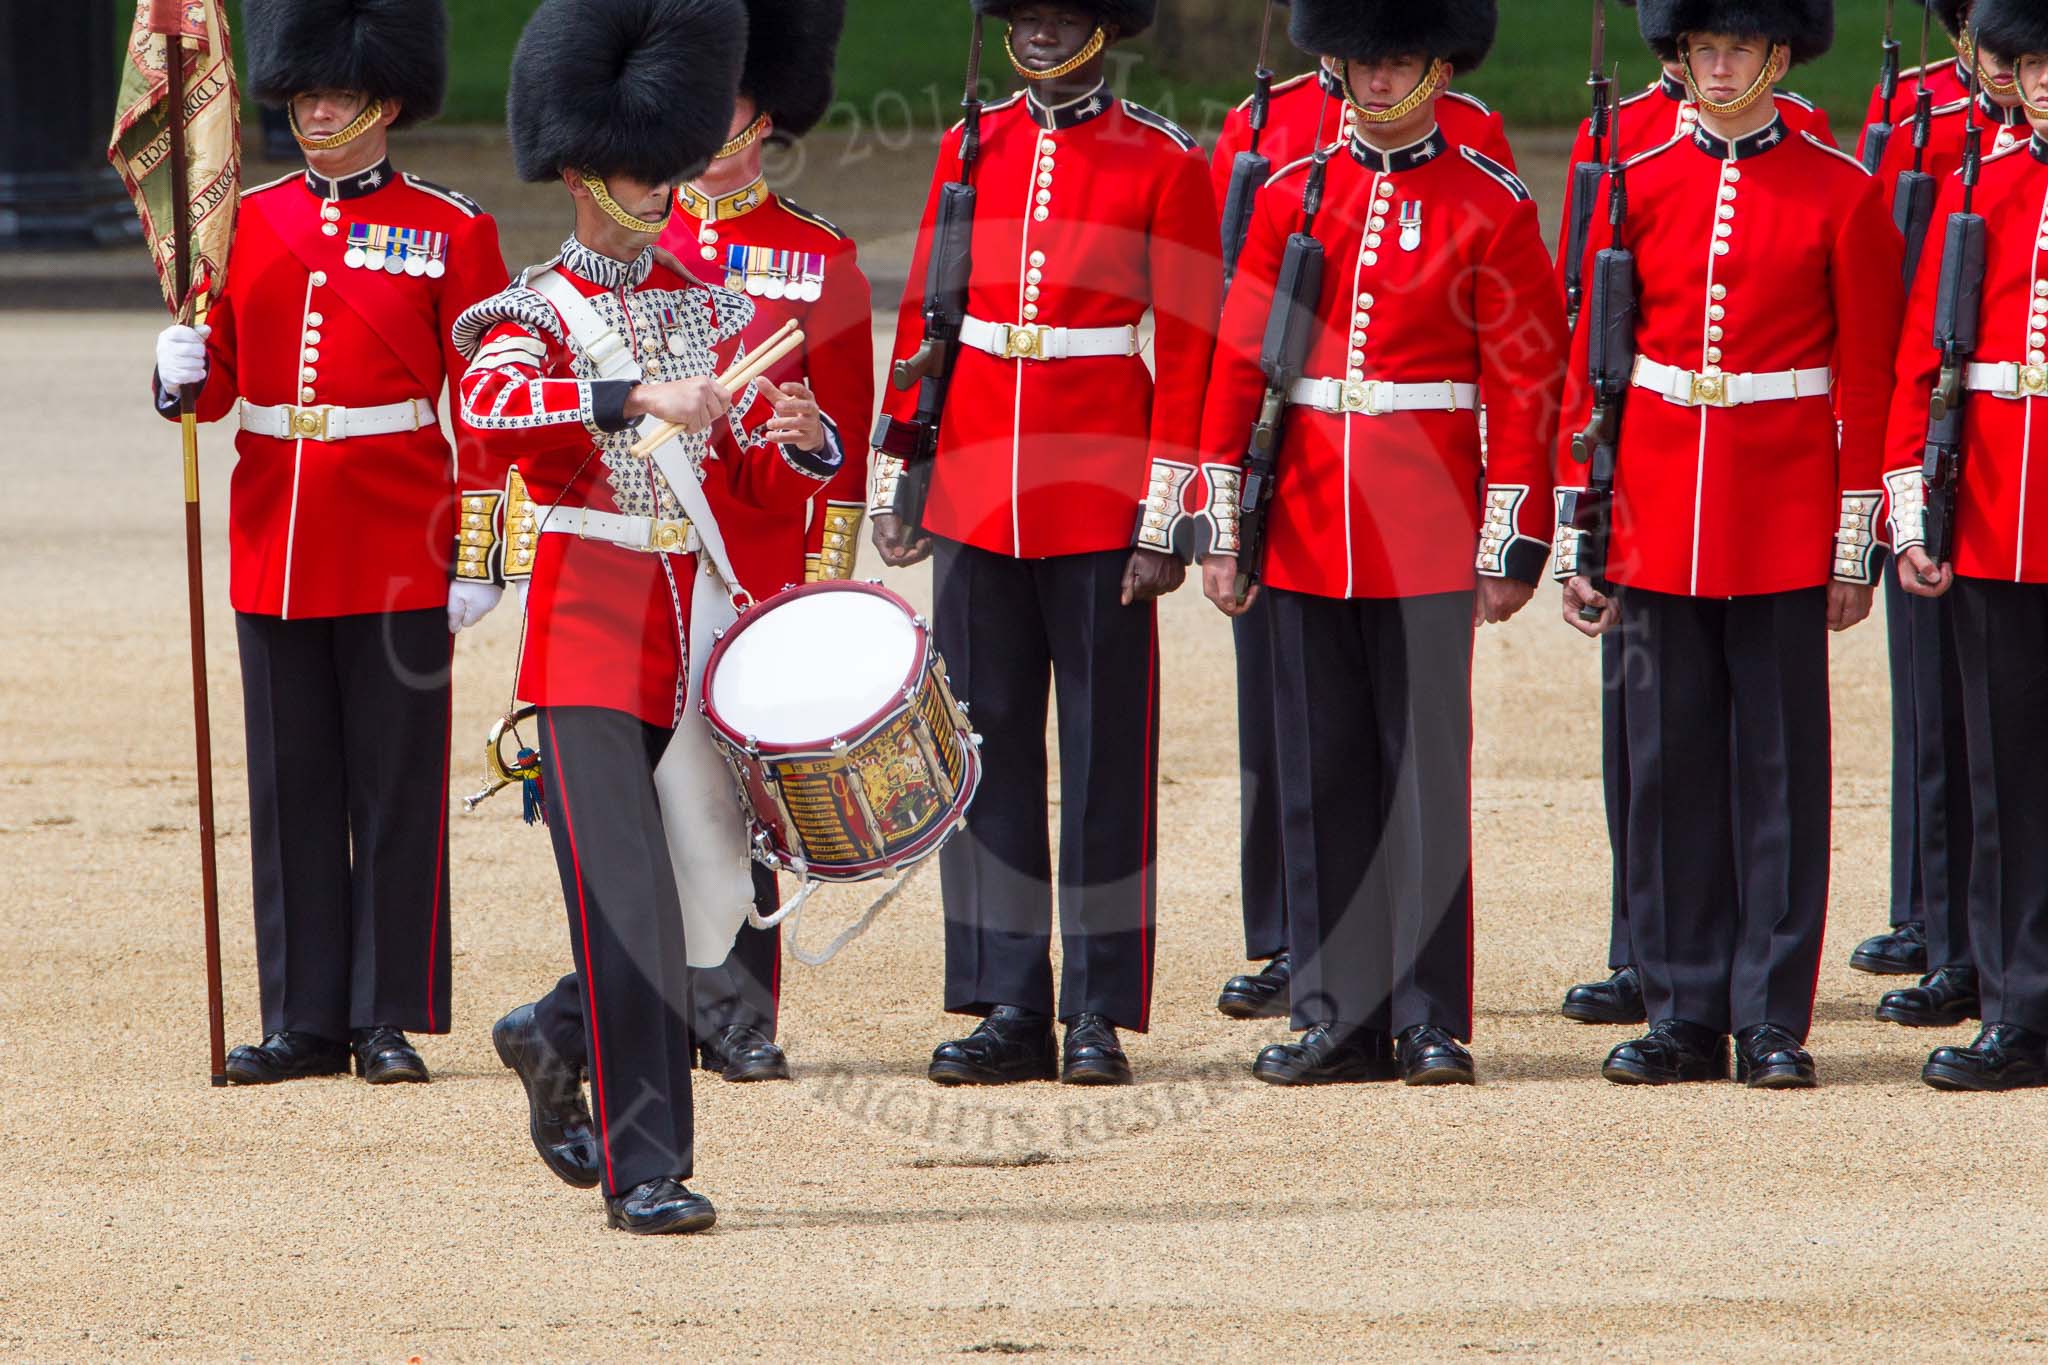 The Colonel's Review 2013: The "Lone Drummer", Lance Corporal Christopher Rees,  marches forward to re-join the band..
Horse Guards Parade, Westminster,
London SW1,

United Kingdom,
on 08 June 2013 at 11:15, image #471